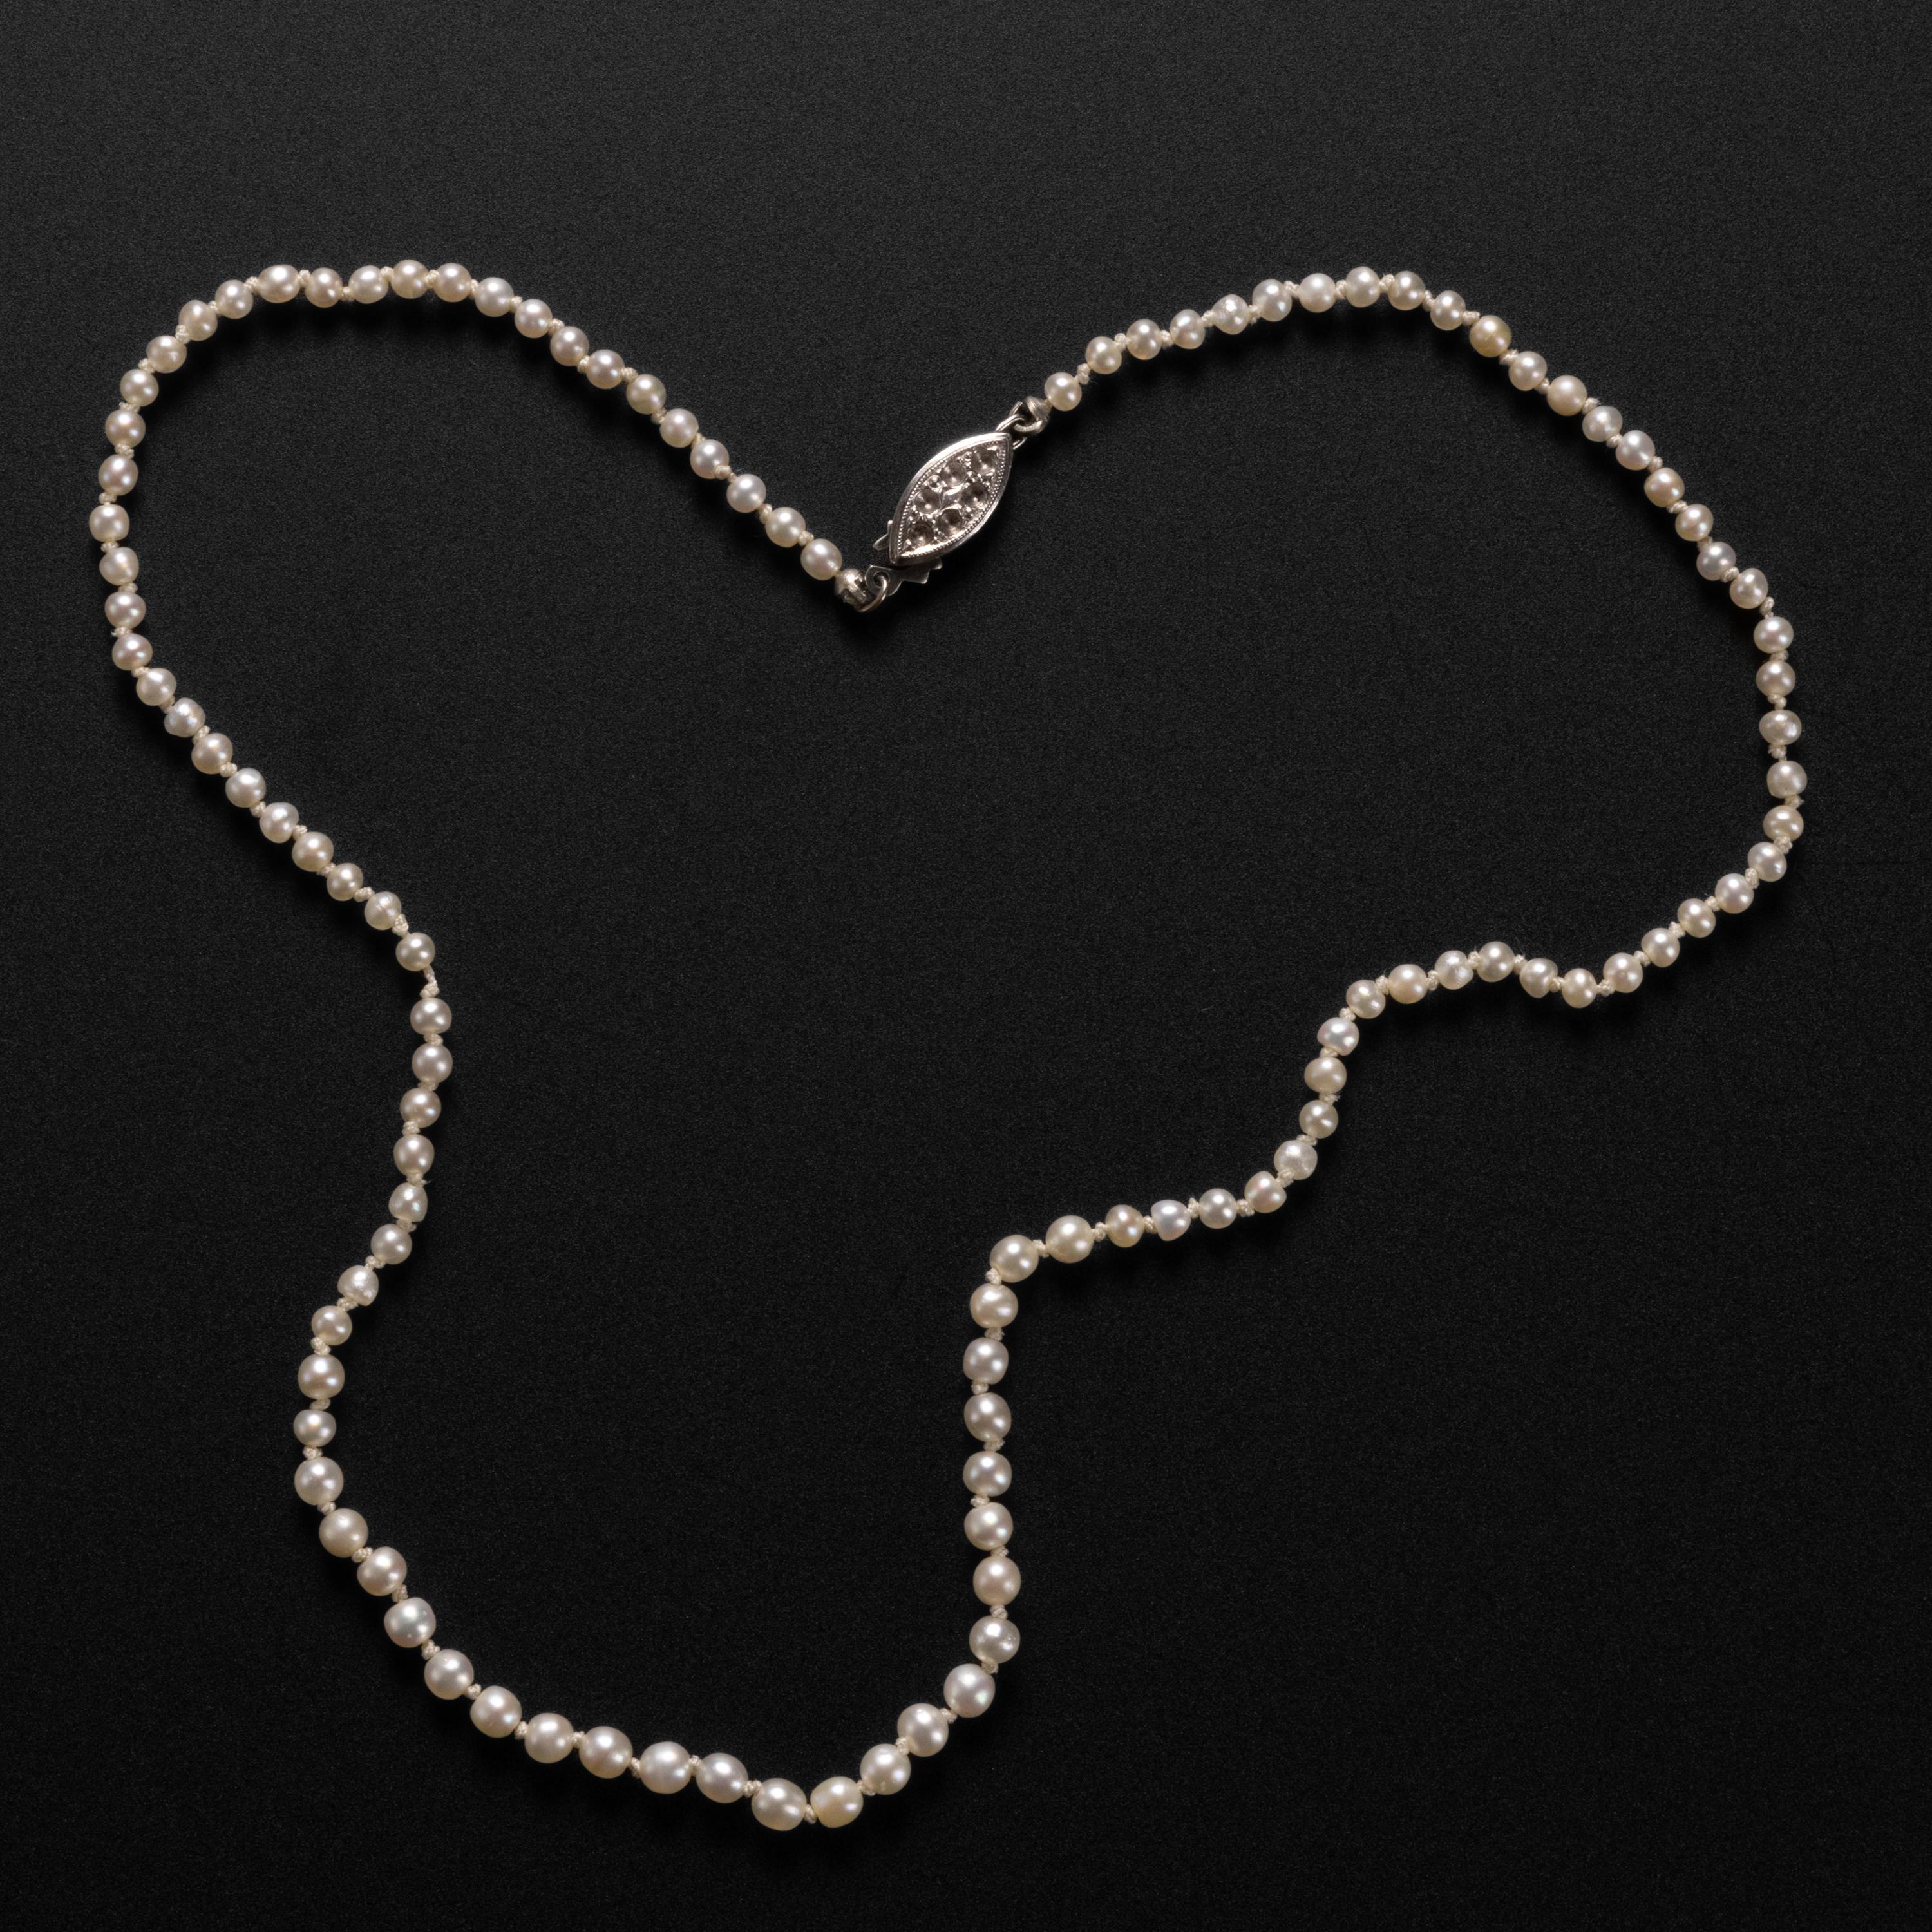 An almost unbearably beautiful necklace composed of one-hundred-and-eleven GIA certified natural, uncultured saltwater pearls. The brief 15